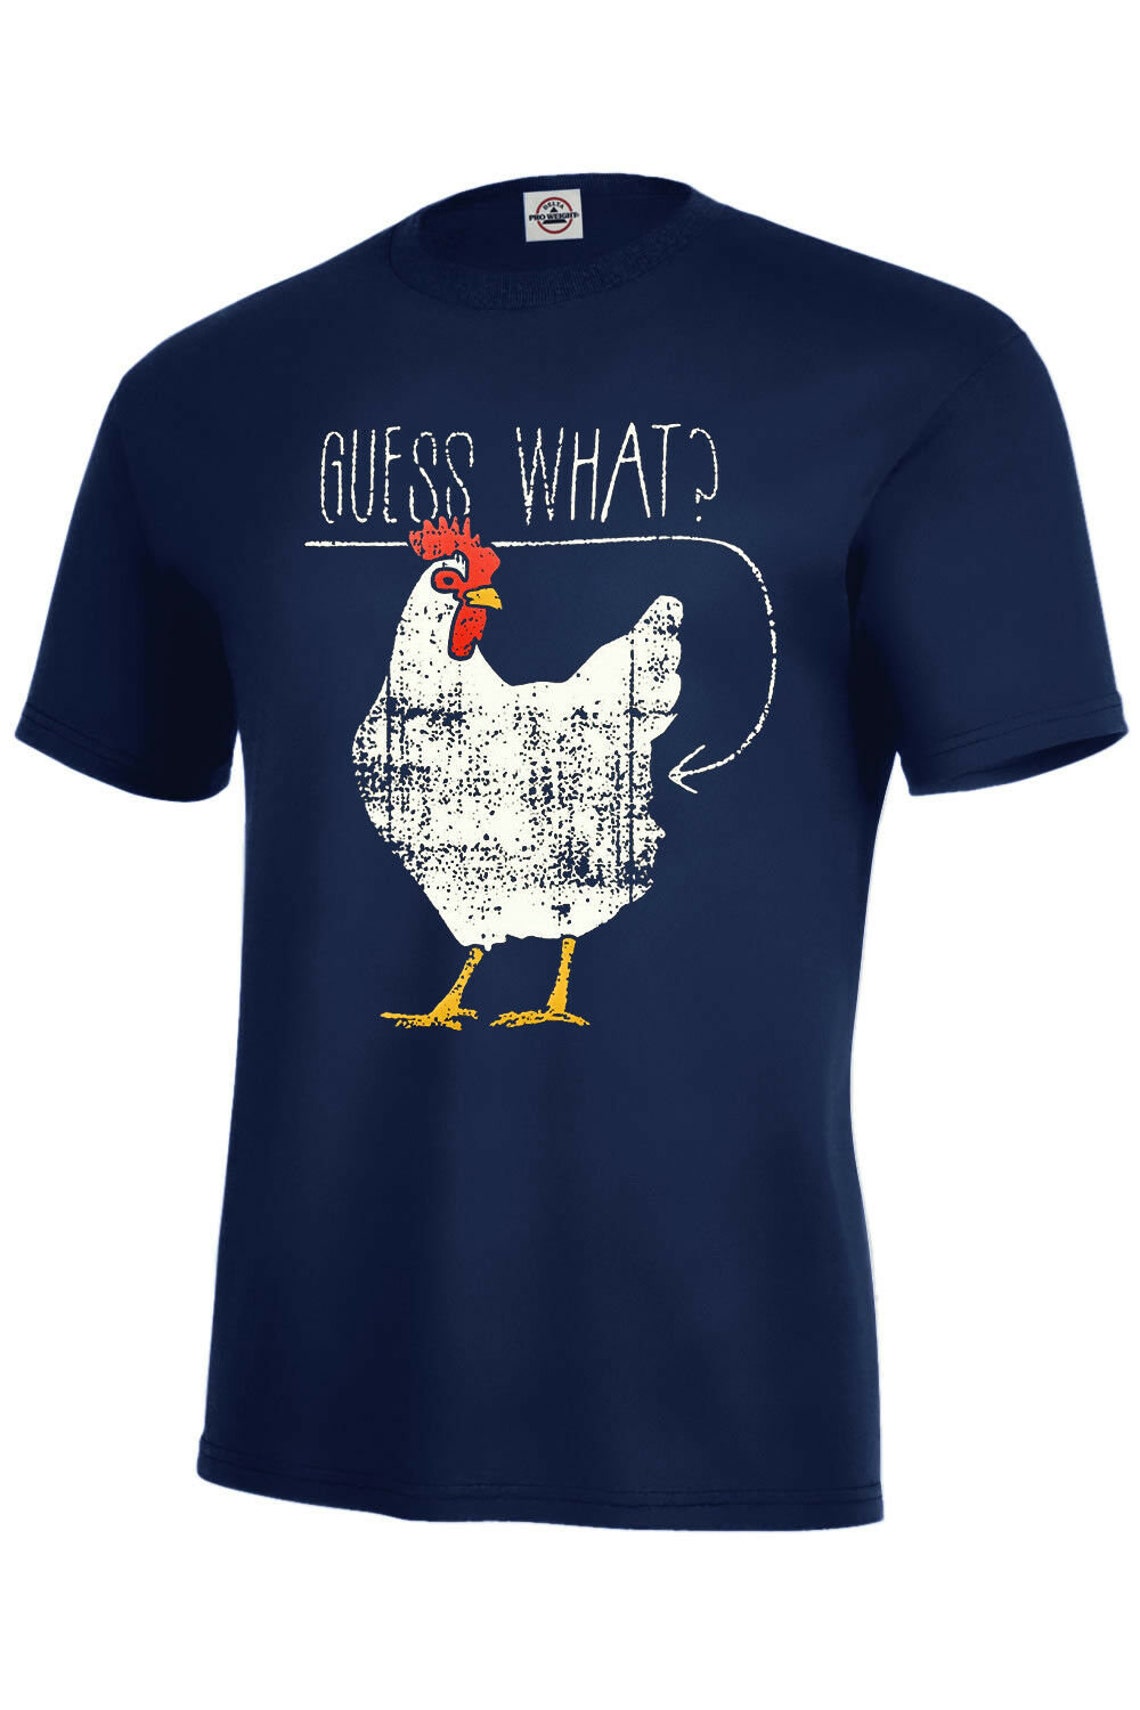 GUESS WHAT Chicken Butt Funny HILARIOUS T-shirt New Funny | Etsy